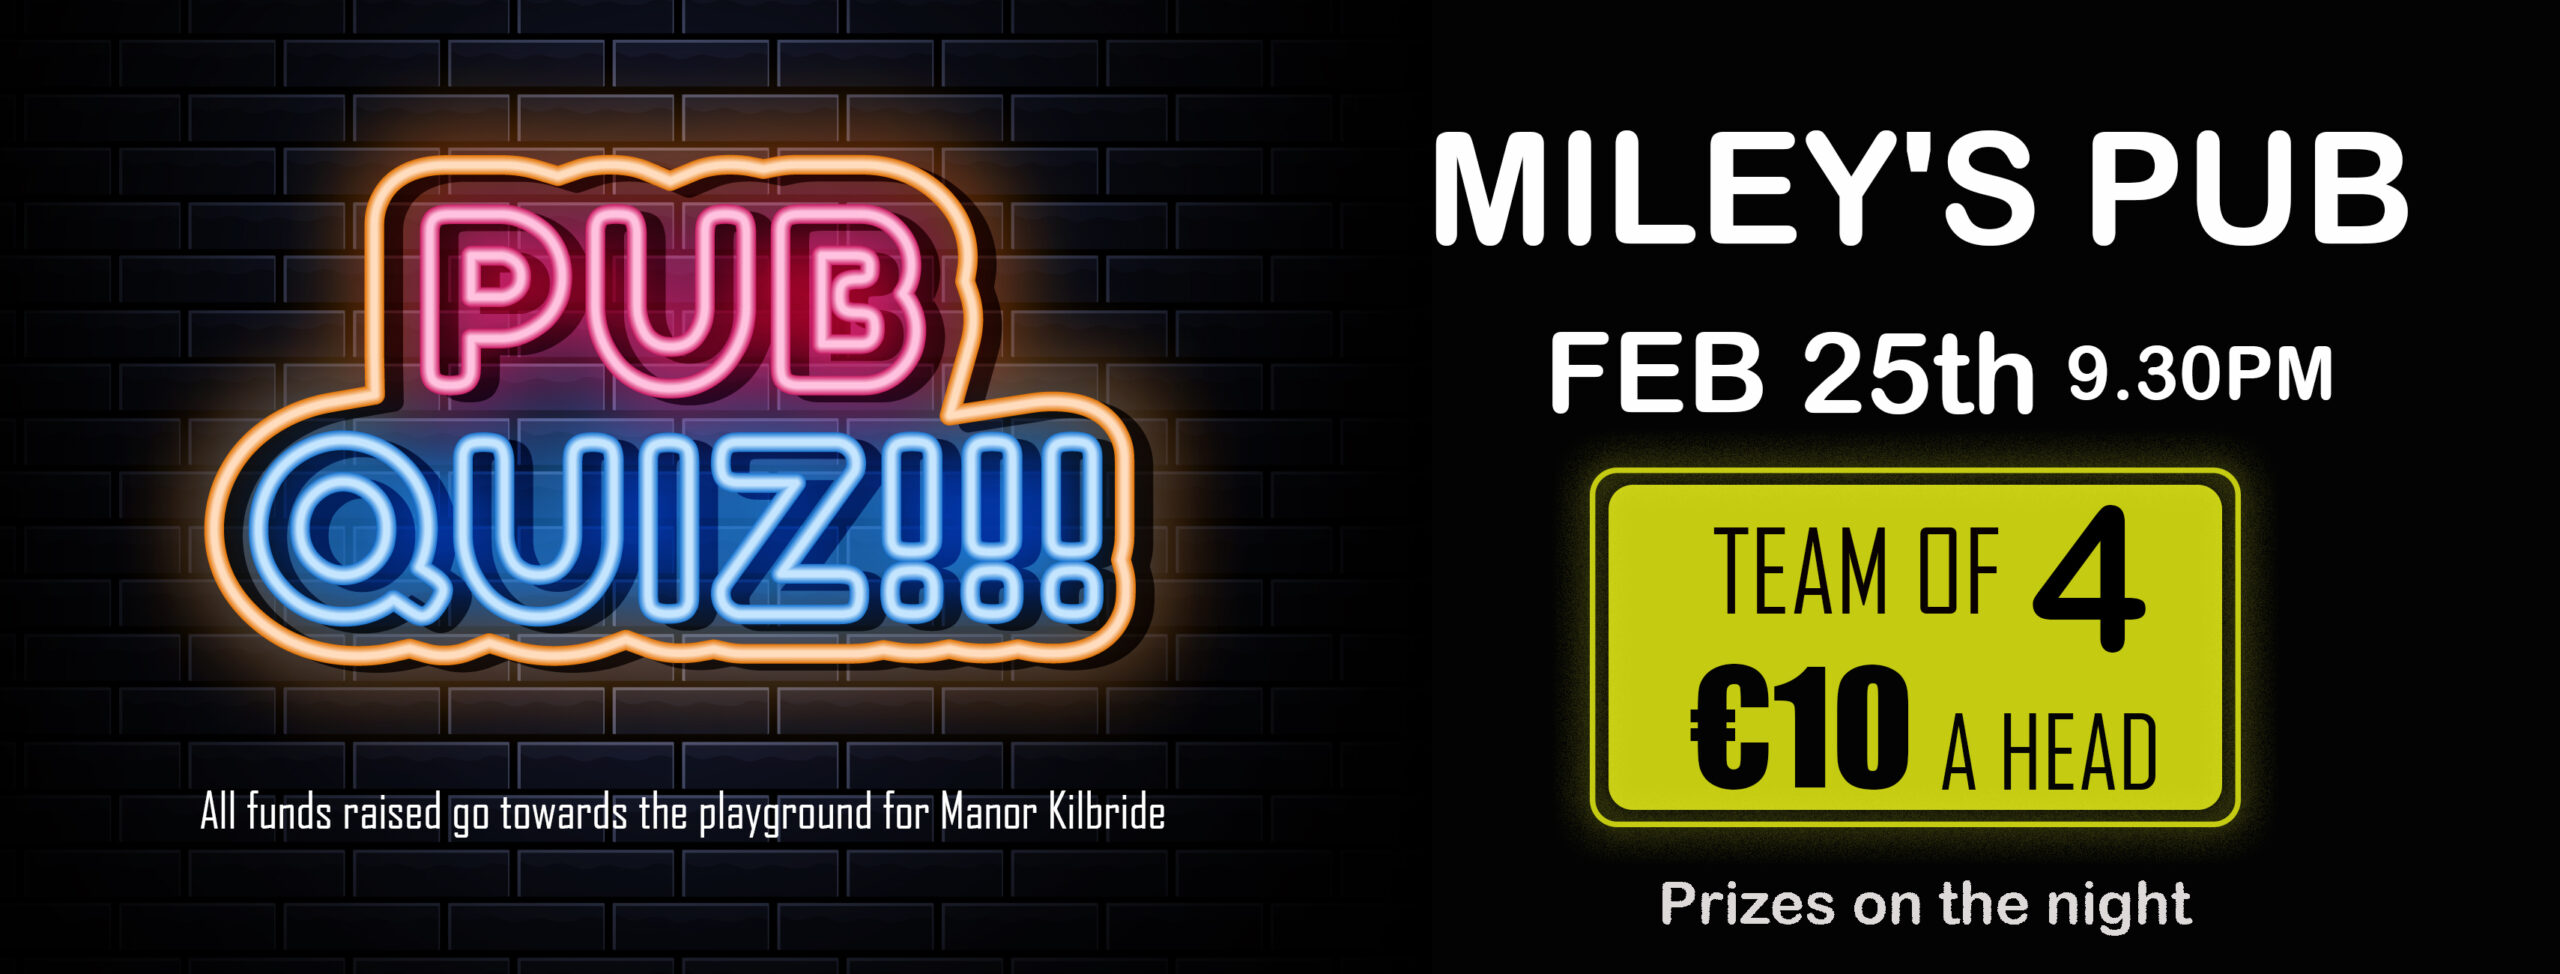 Quiz Night in Miley’s Pub on Saturday the 25th of February from 9.30PM – All Welcome